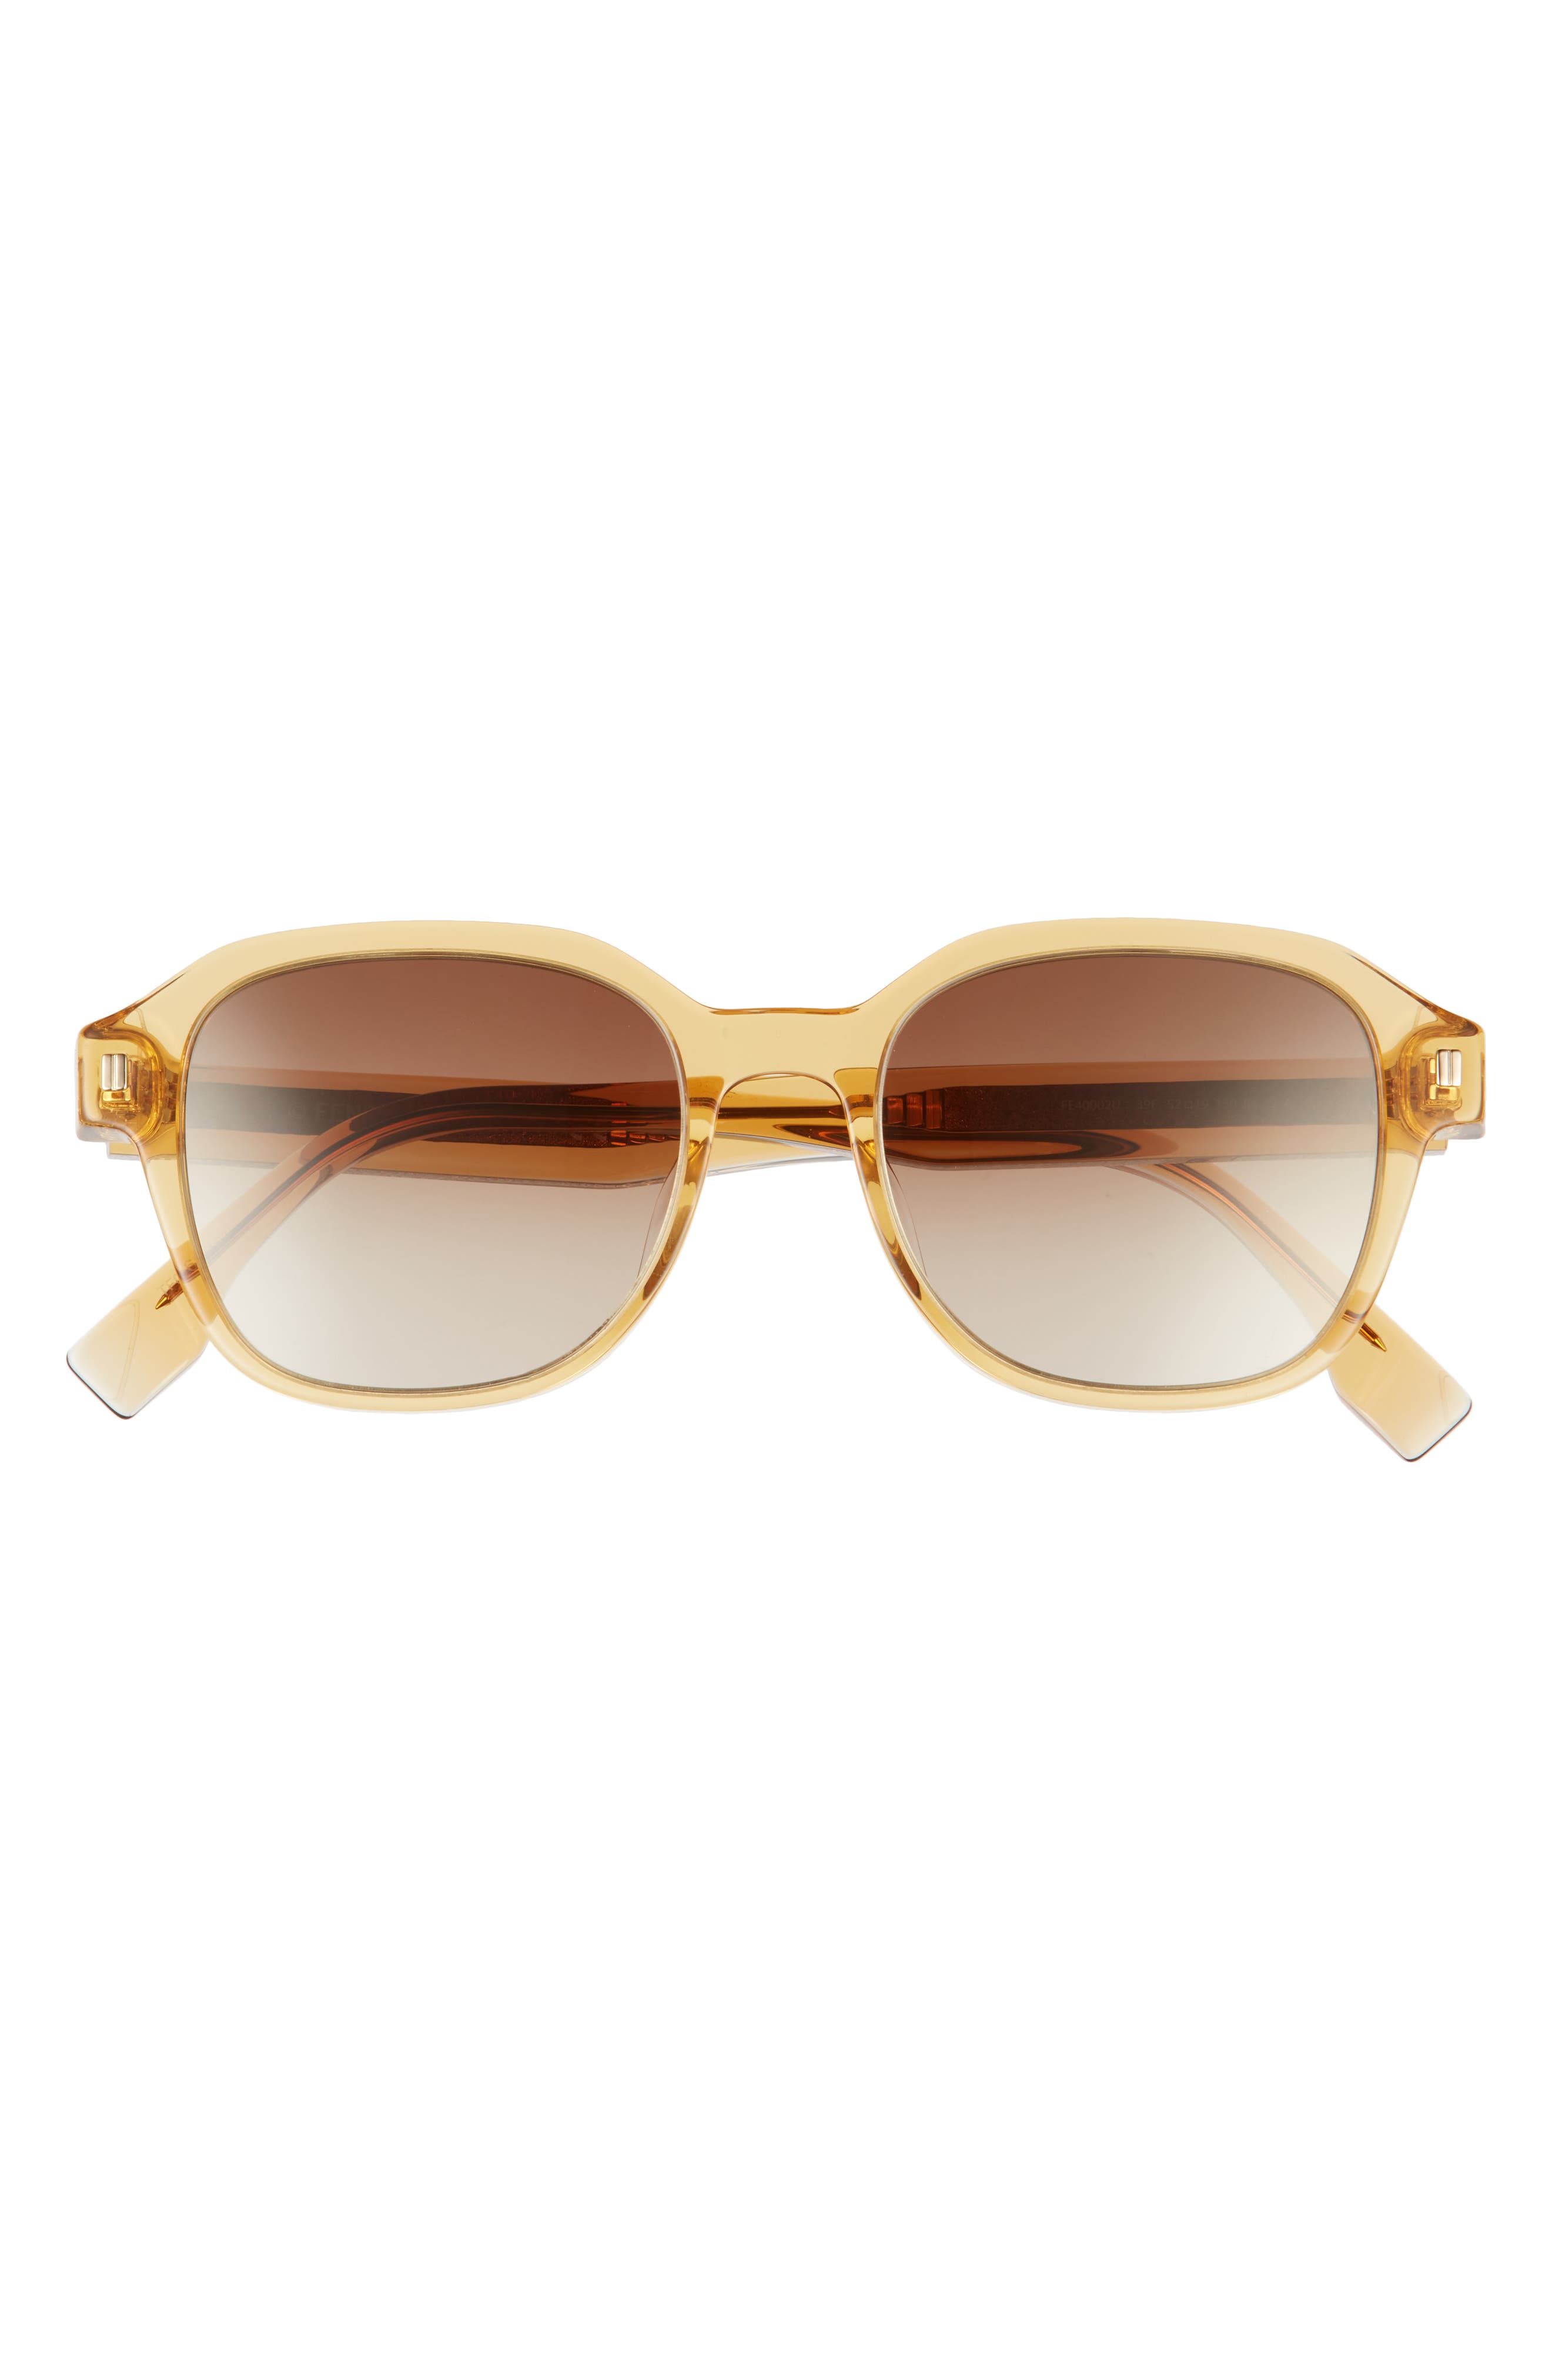 Fendi 52mm Round Sunglasses in Shiny Yellow /Gradient Brown at Nordstrom